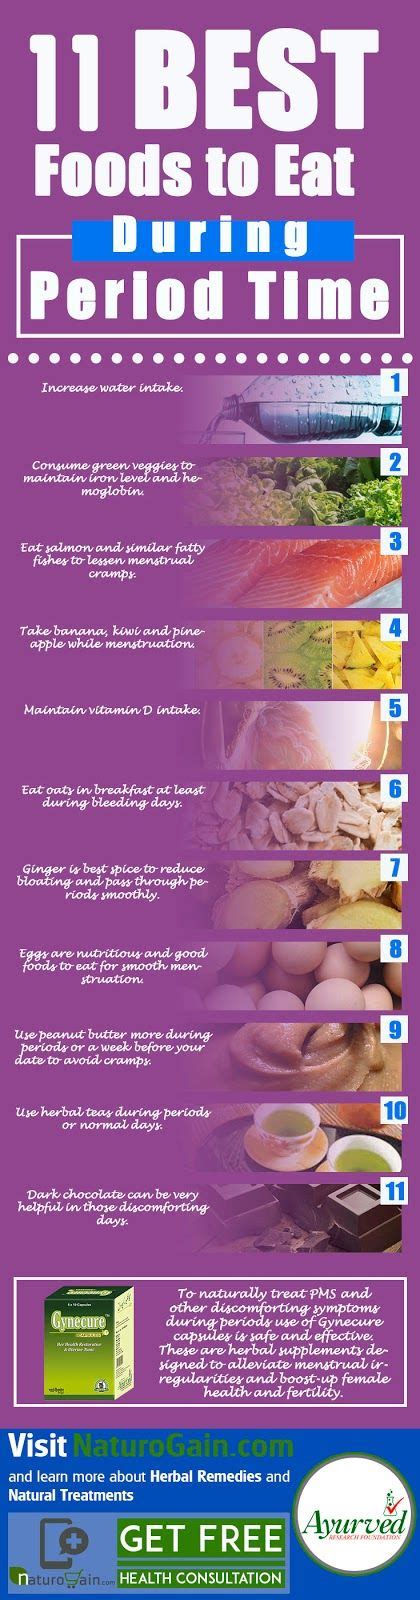 11 best foods to eat during period time infographic good foods to eat foods to eat bad food